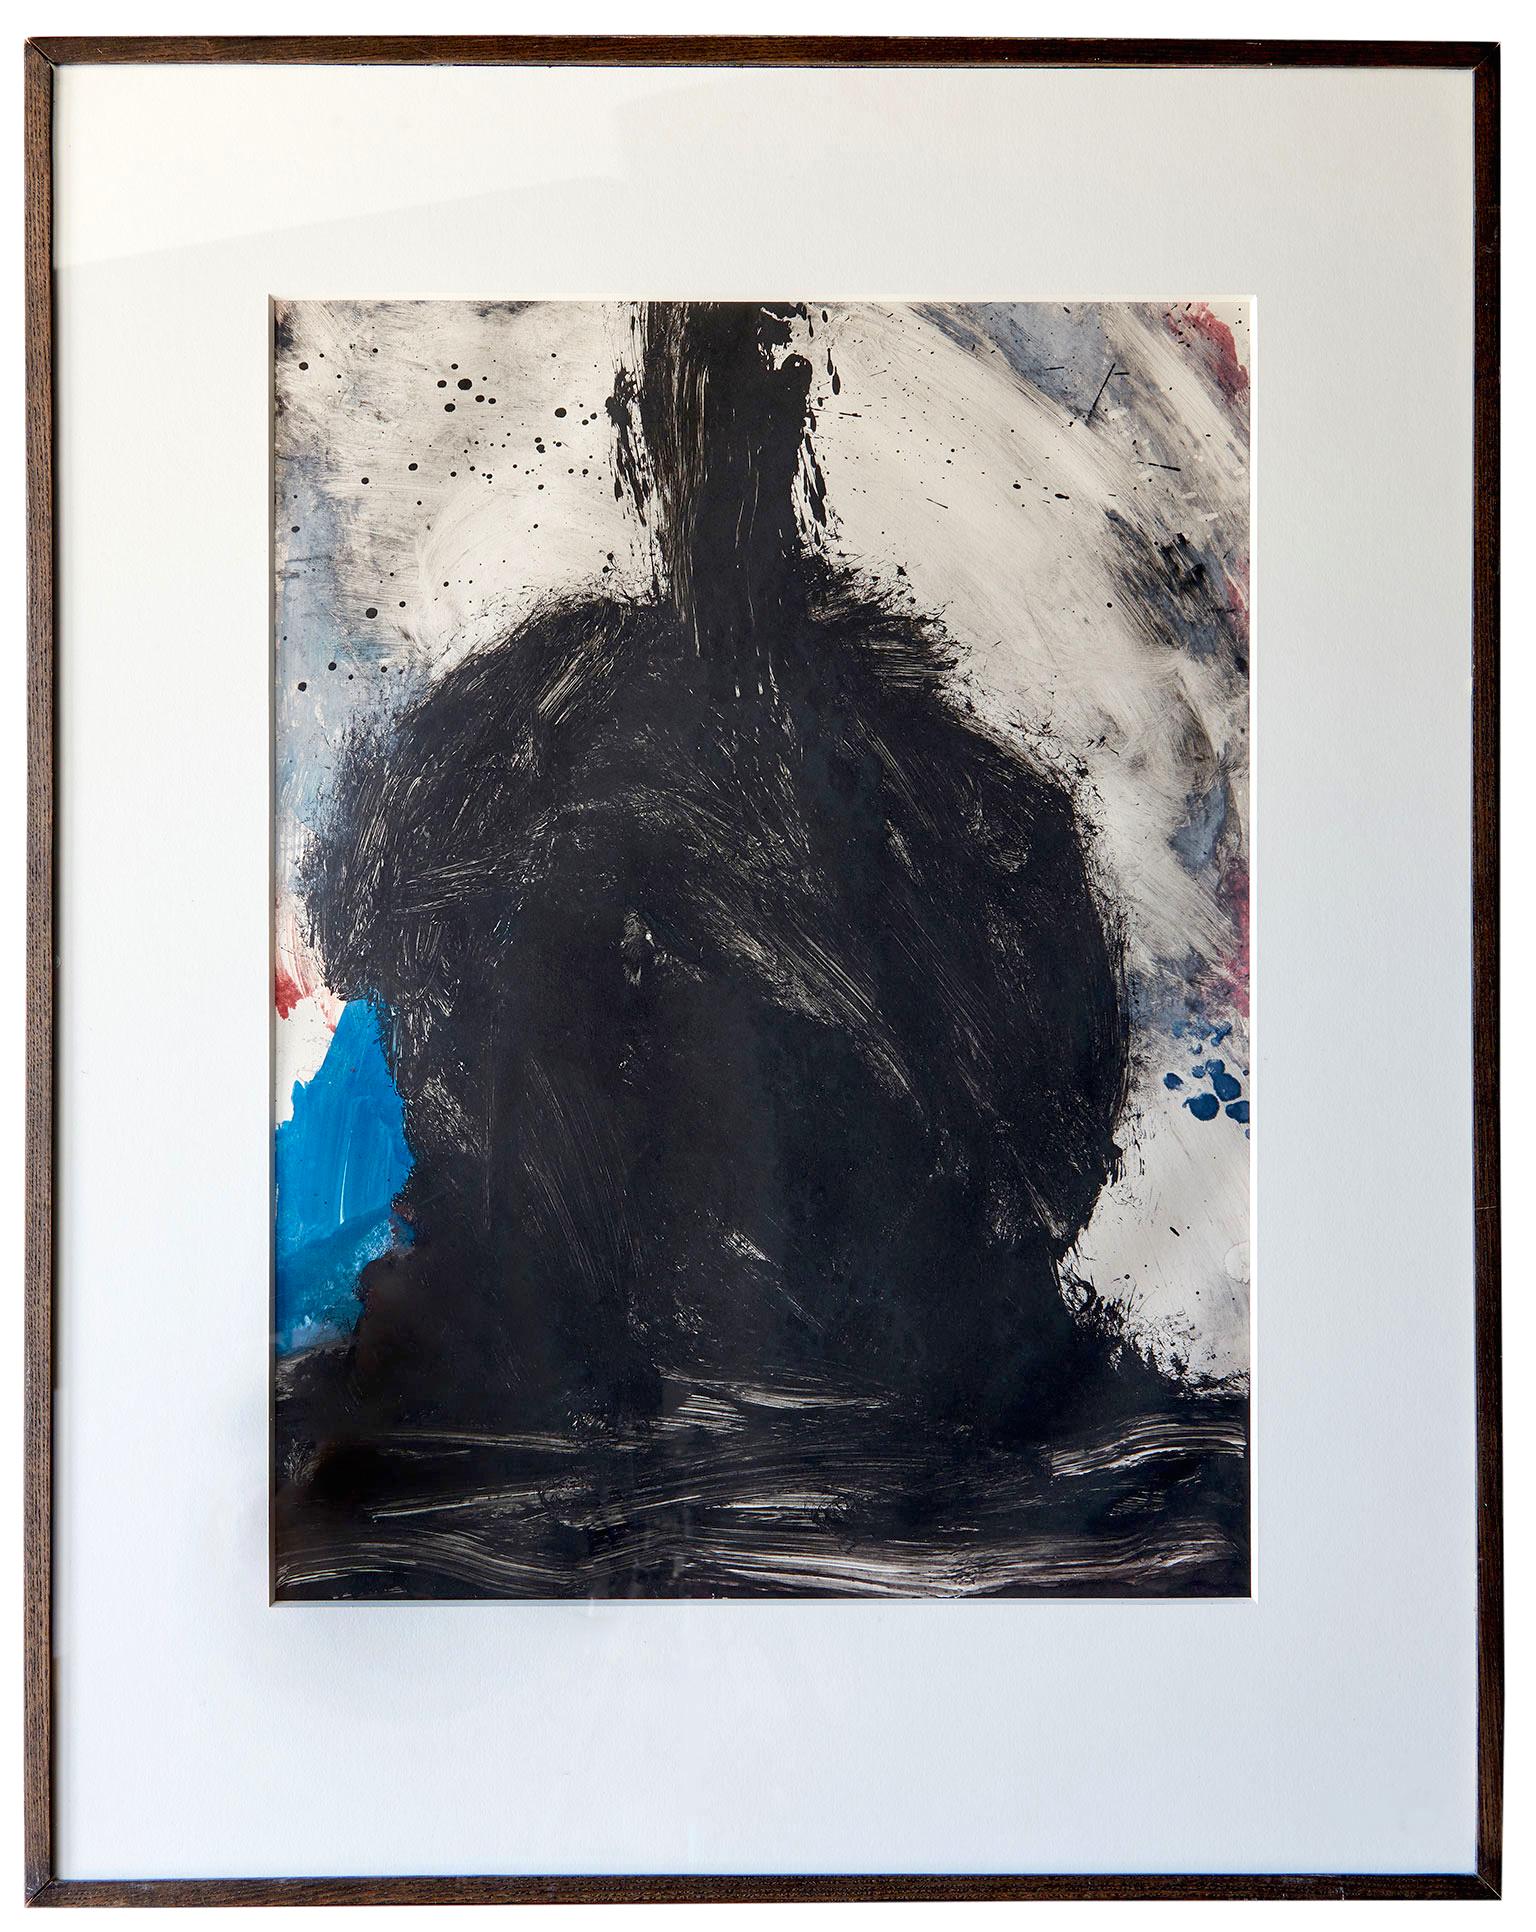 This untitled abstract expressionist piece is a monotype (ink painting) by the hand of the inimitable enfant terrible of American Postwar ceramics and sculpture, Peter Voulkos. Effectively an original painting transferred directly to paper, the